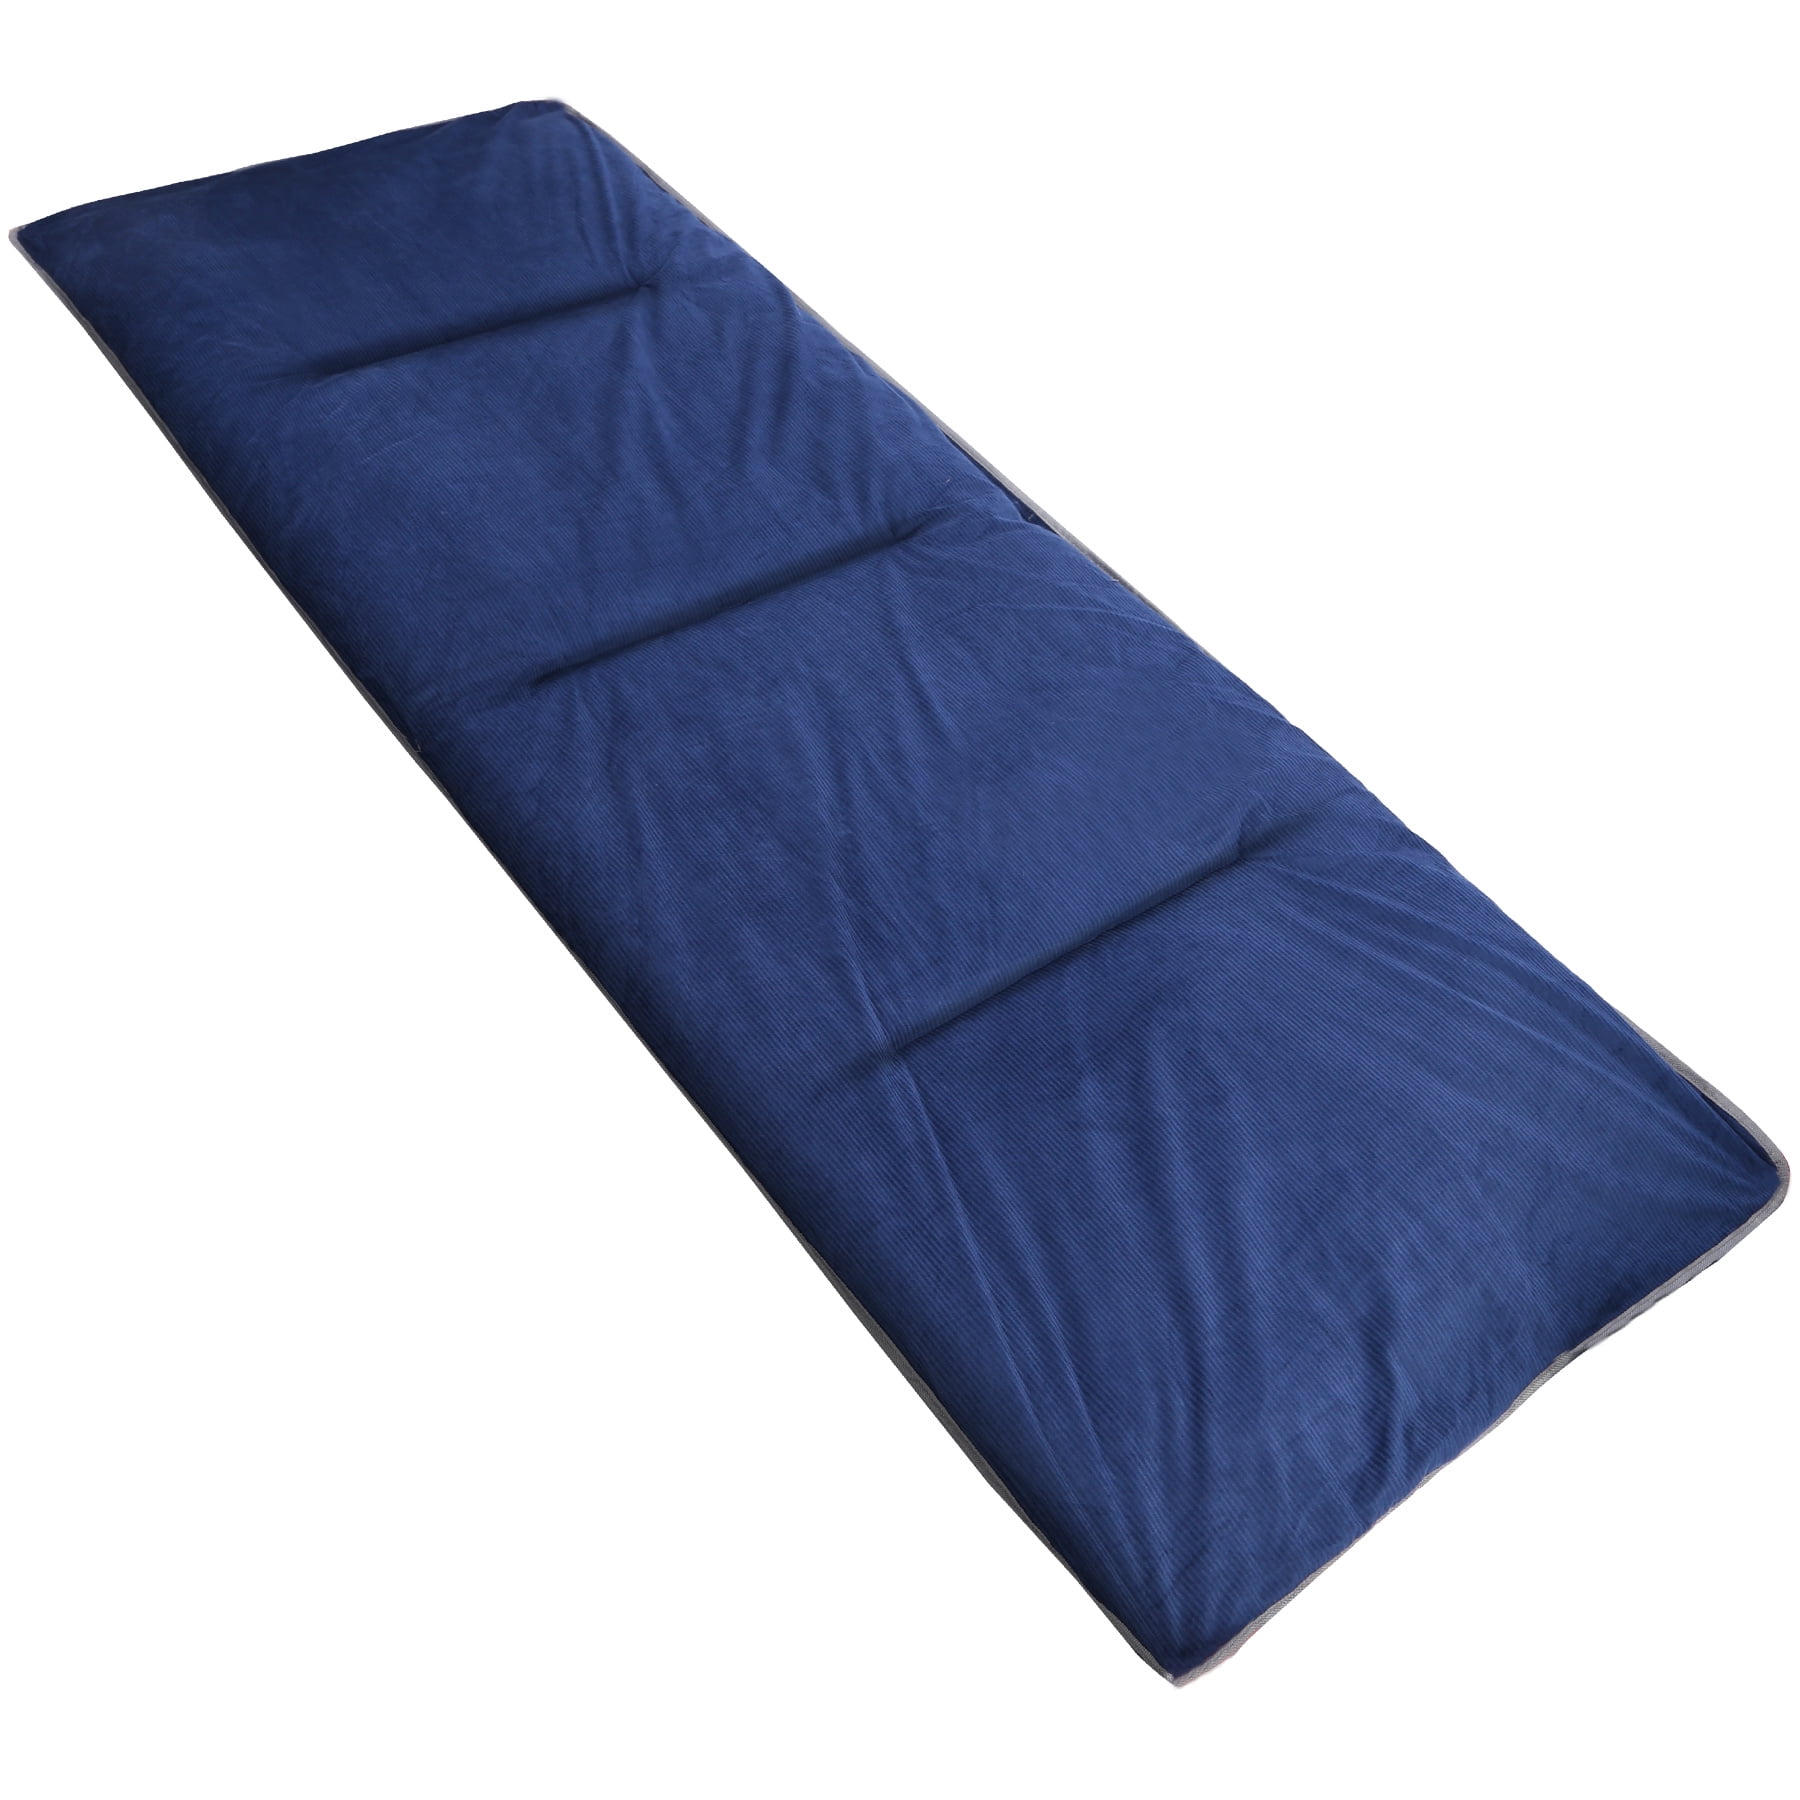 Brown Grey and Navy Blue REDCAMP XL Cot Pads for Camping Soft Comfortable Cotton Thin Sleeping Cot Mattress Pad 75x28 